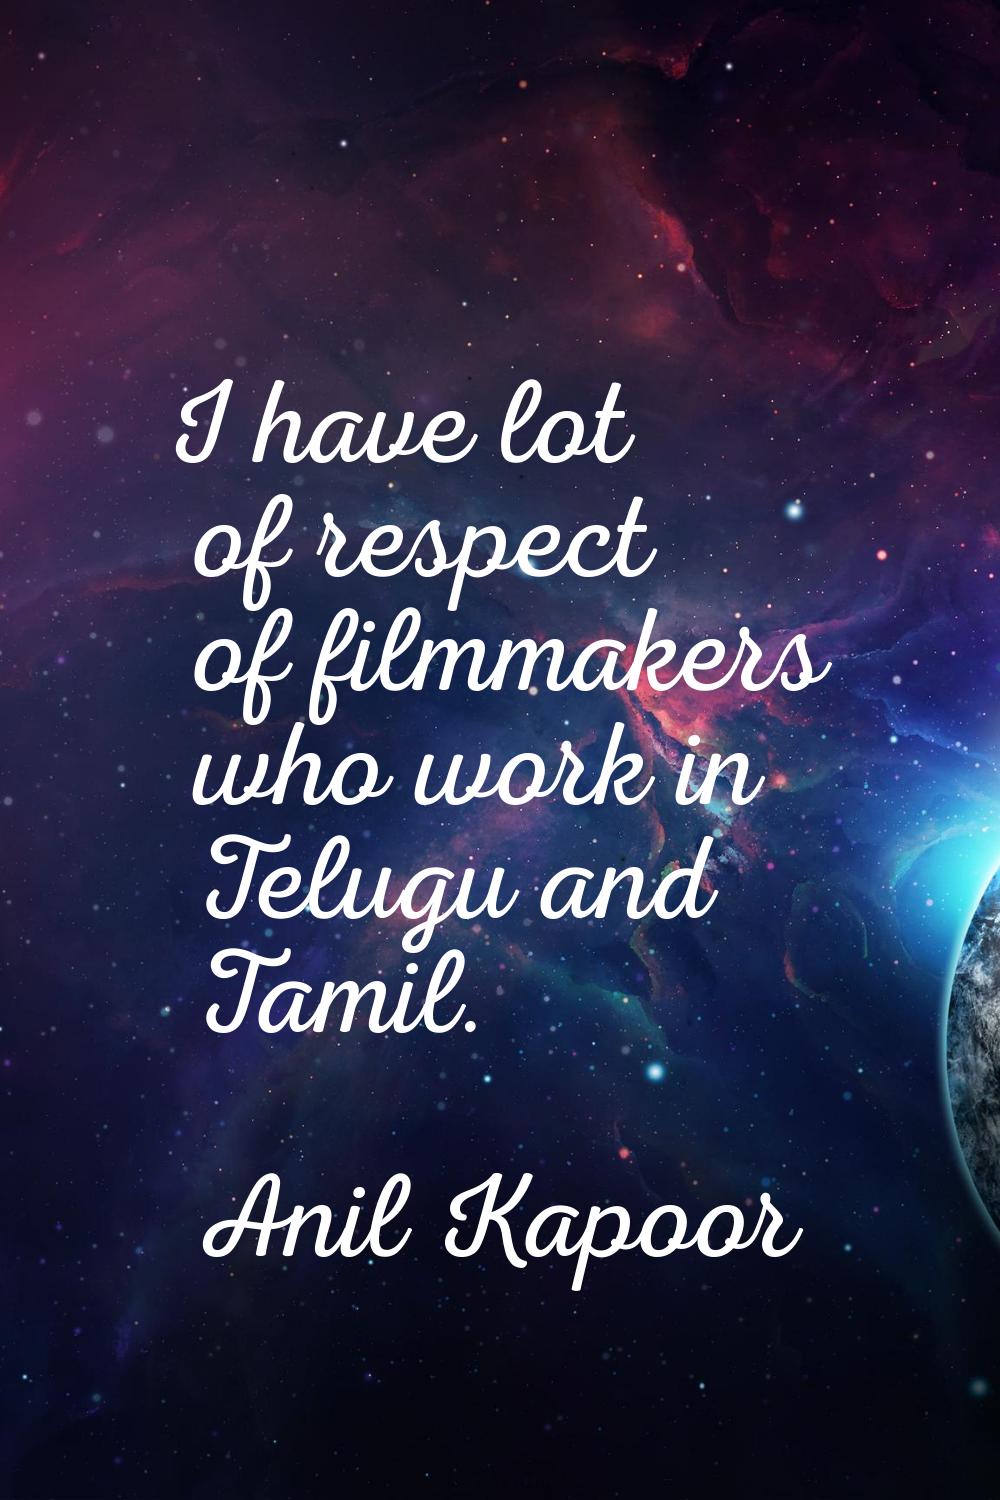 I have lot of respect of filmmakers who work in Telugu and Tamil.